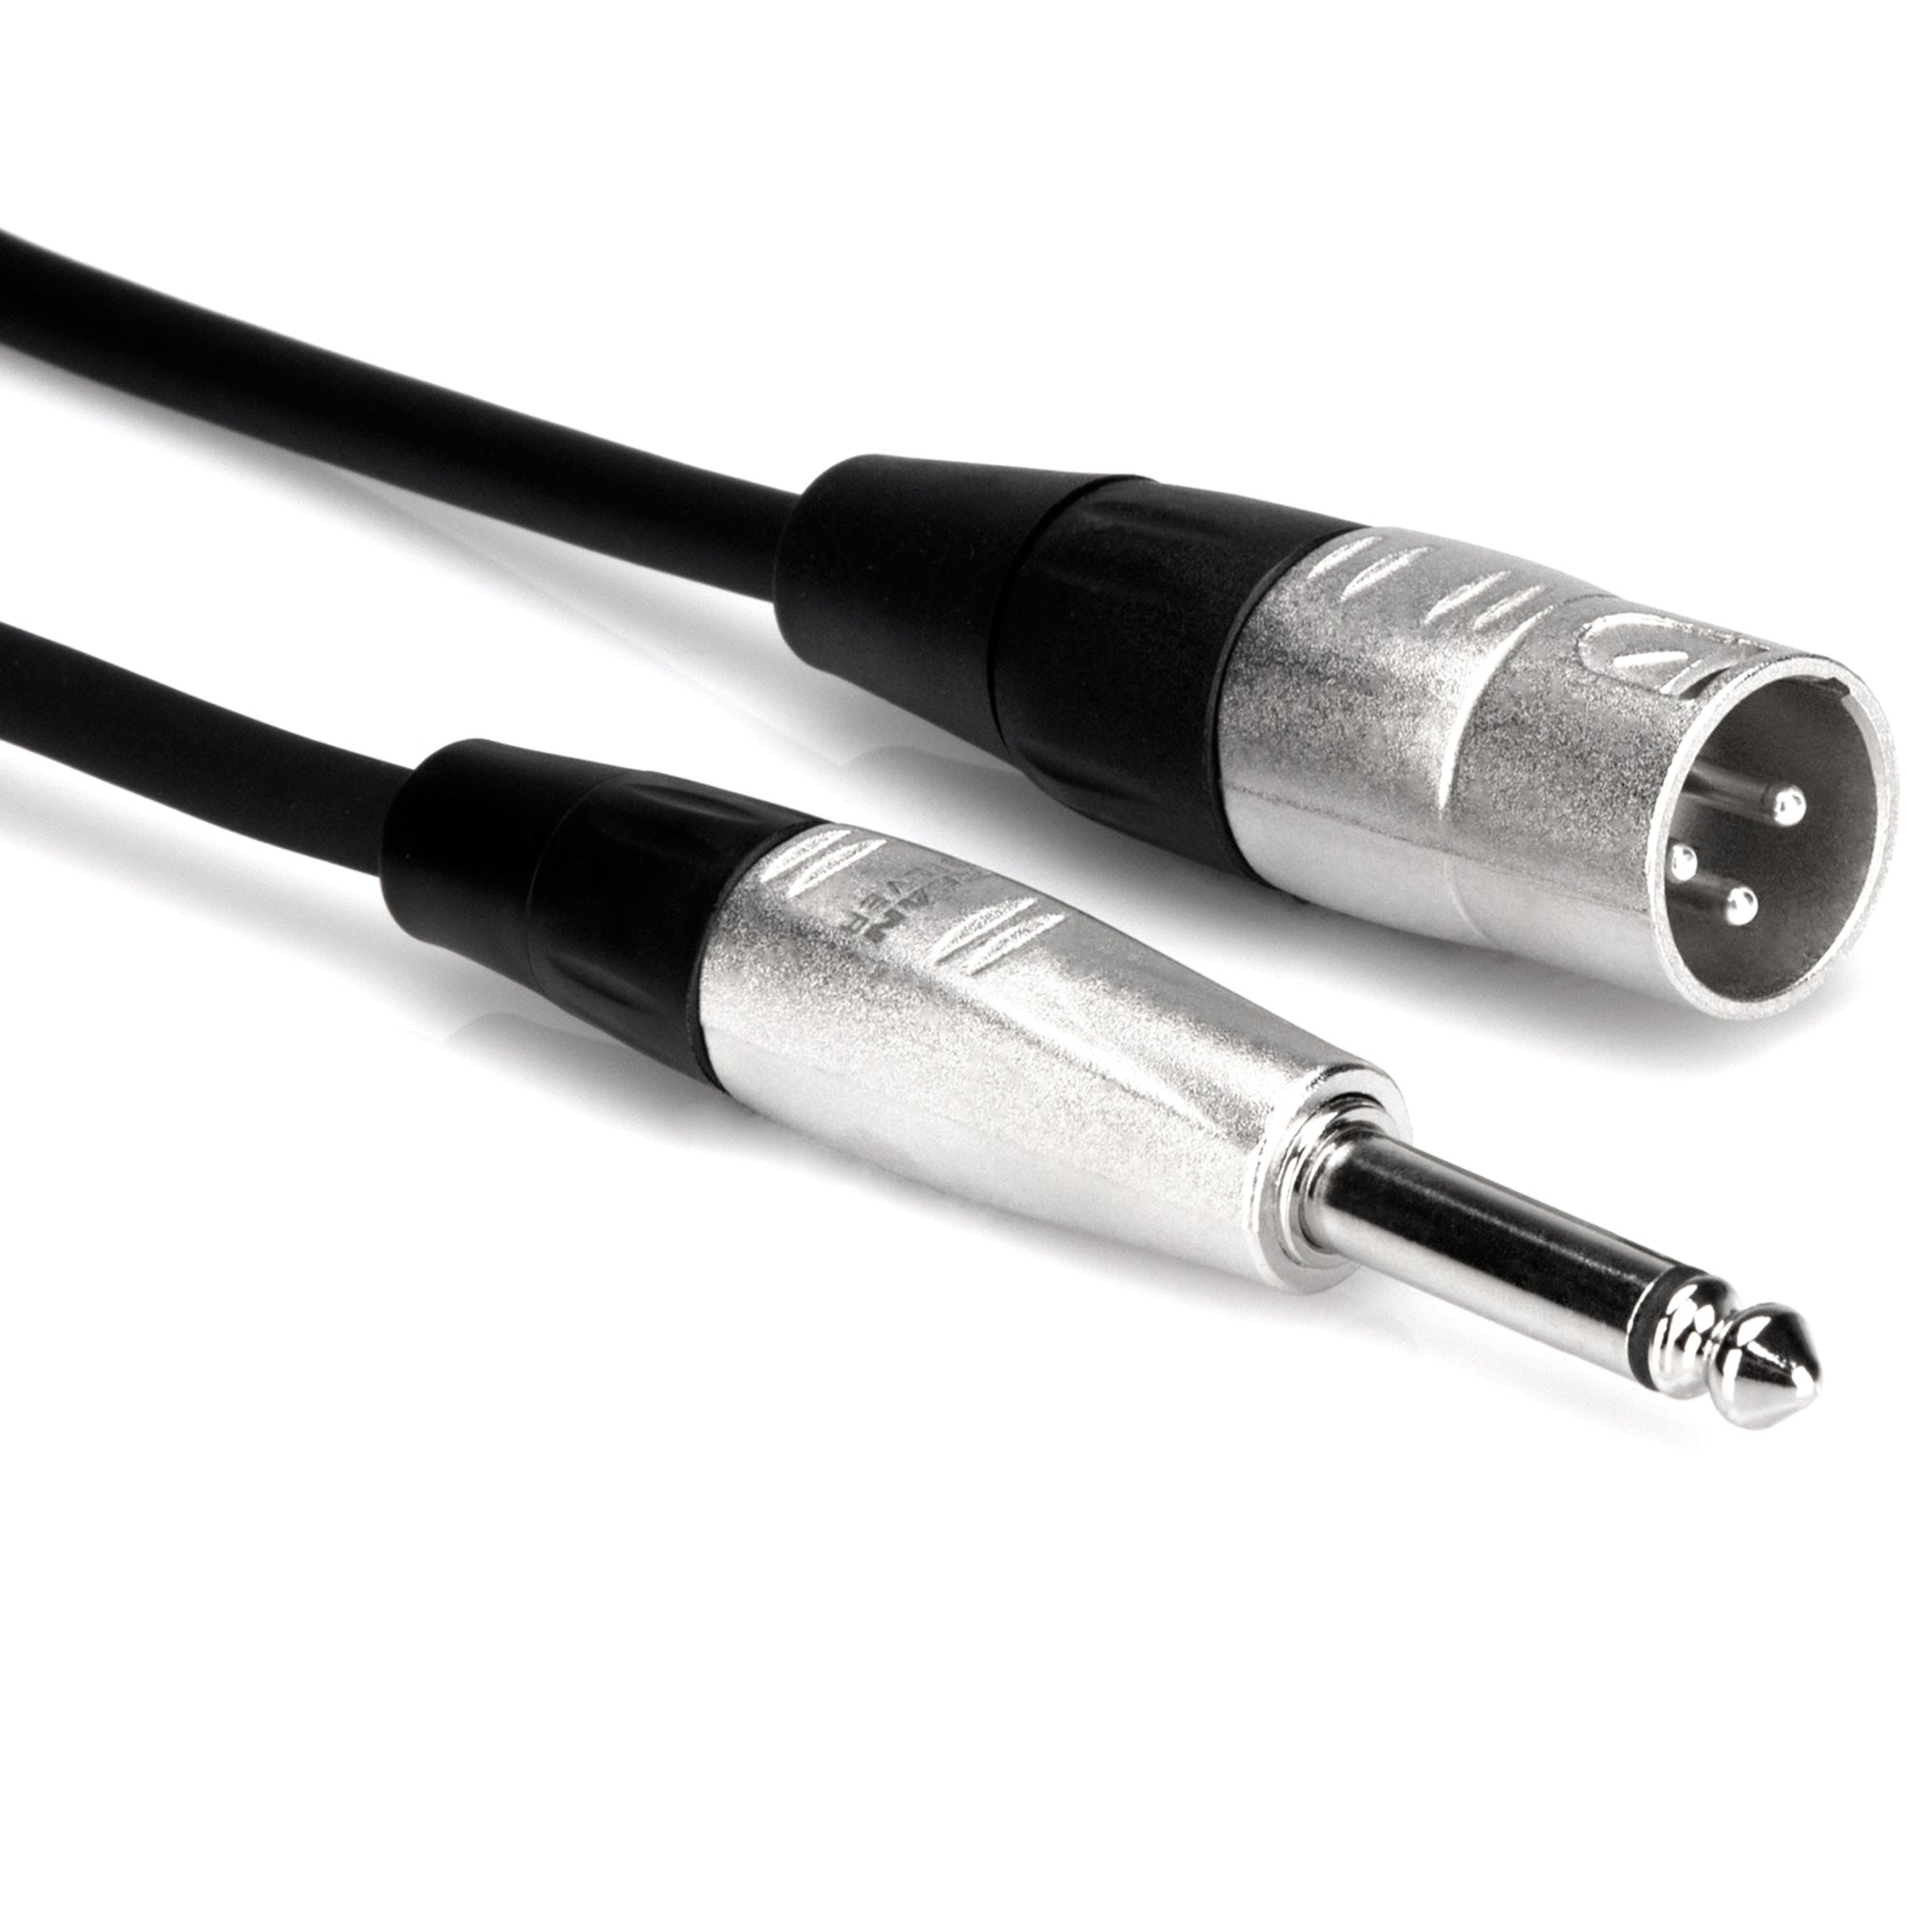 Hosa HPX-015 15ft Pro Cable - XLRM to 1/4 TS